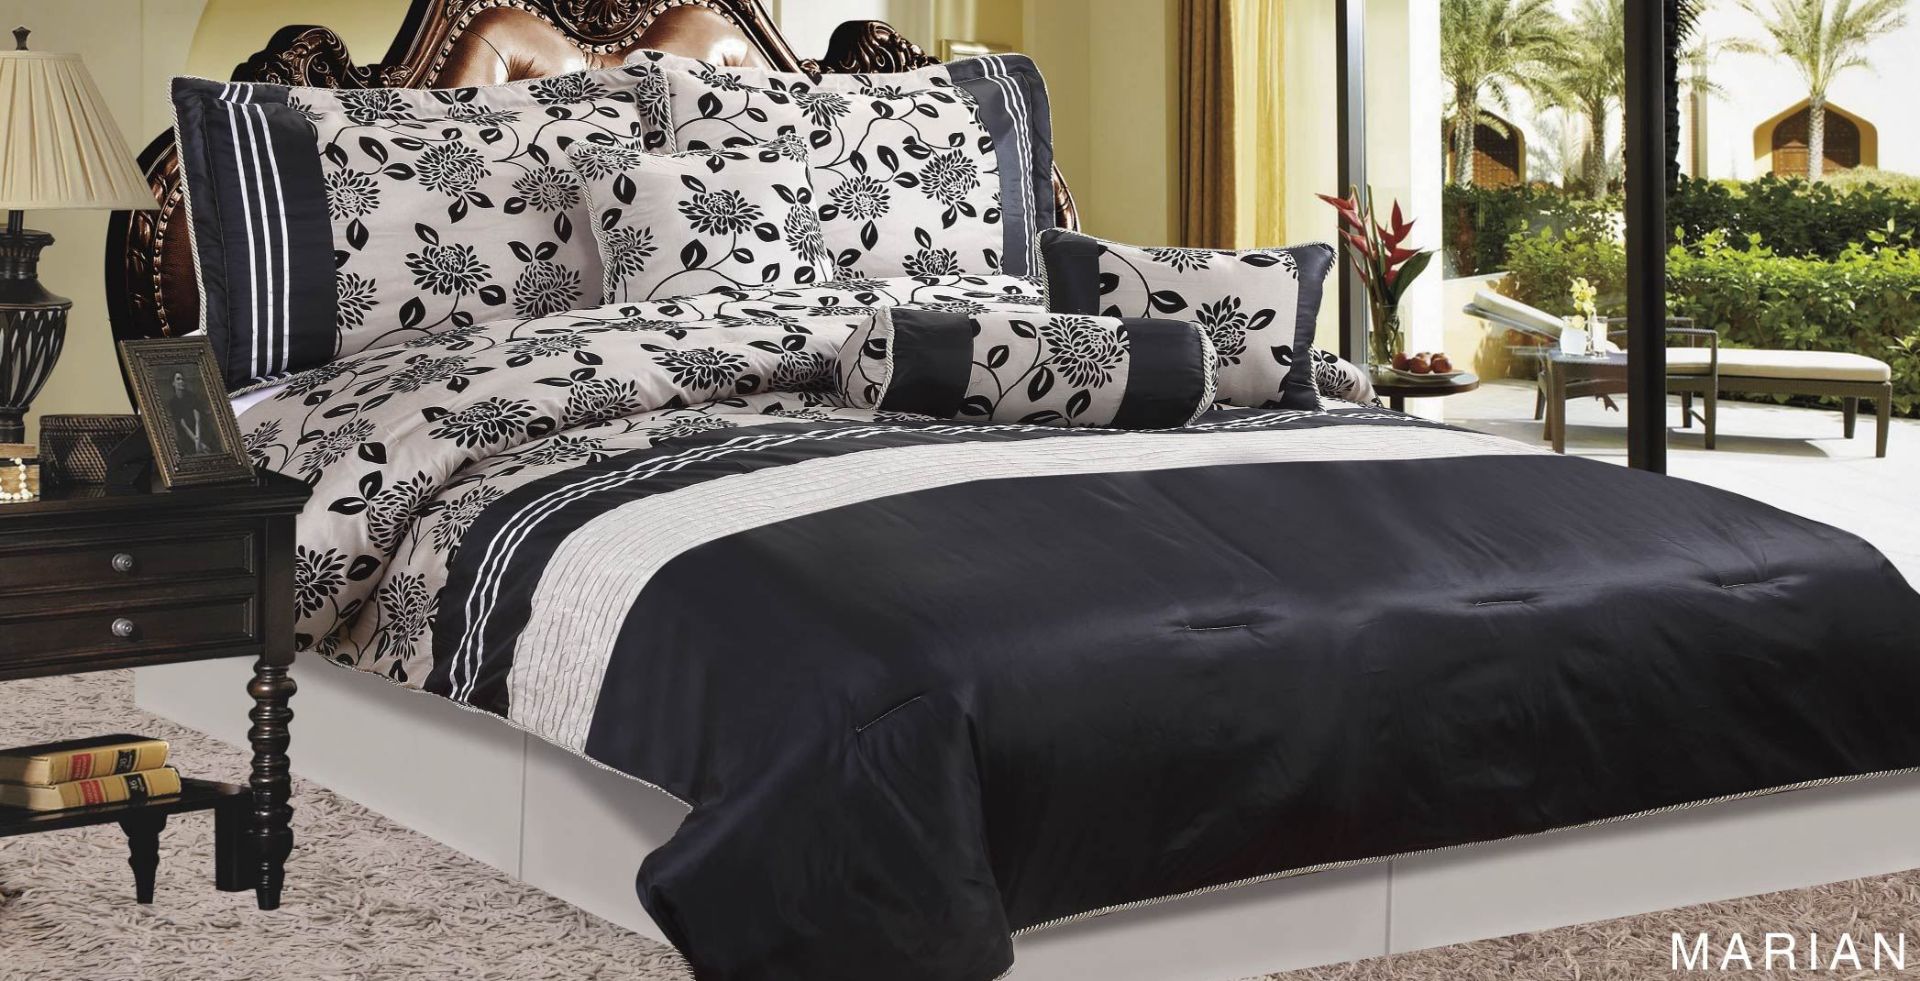 V 3pce Marian Cream And Black King Size Bedspread And Pillowcase Set RRP79.99 X  2  Bid price to